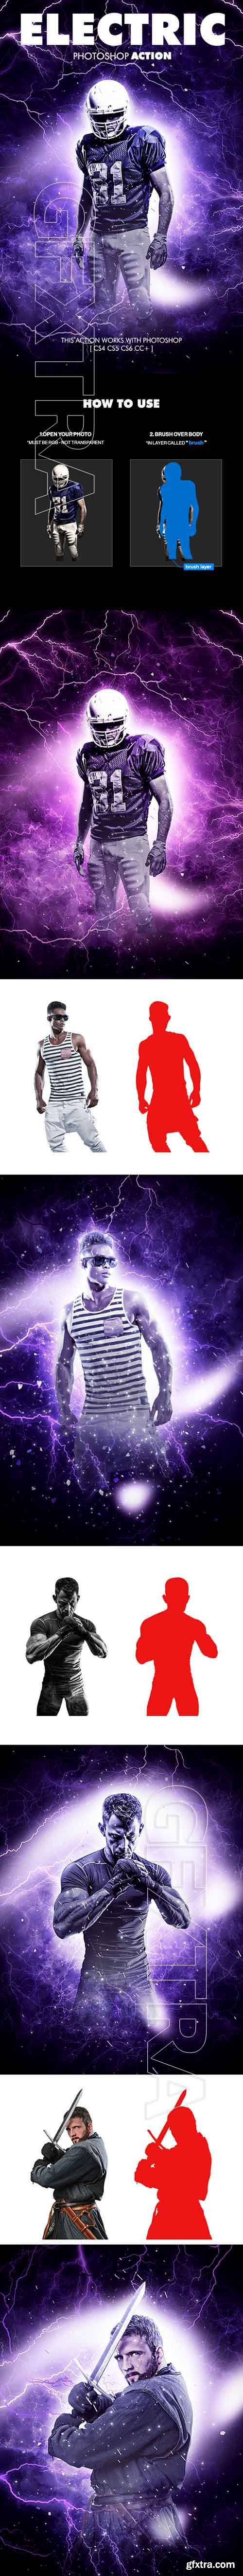 GraphicRiver - Electric Photoshop Action 20679472